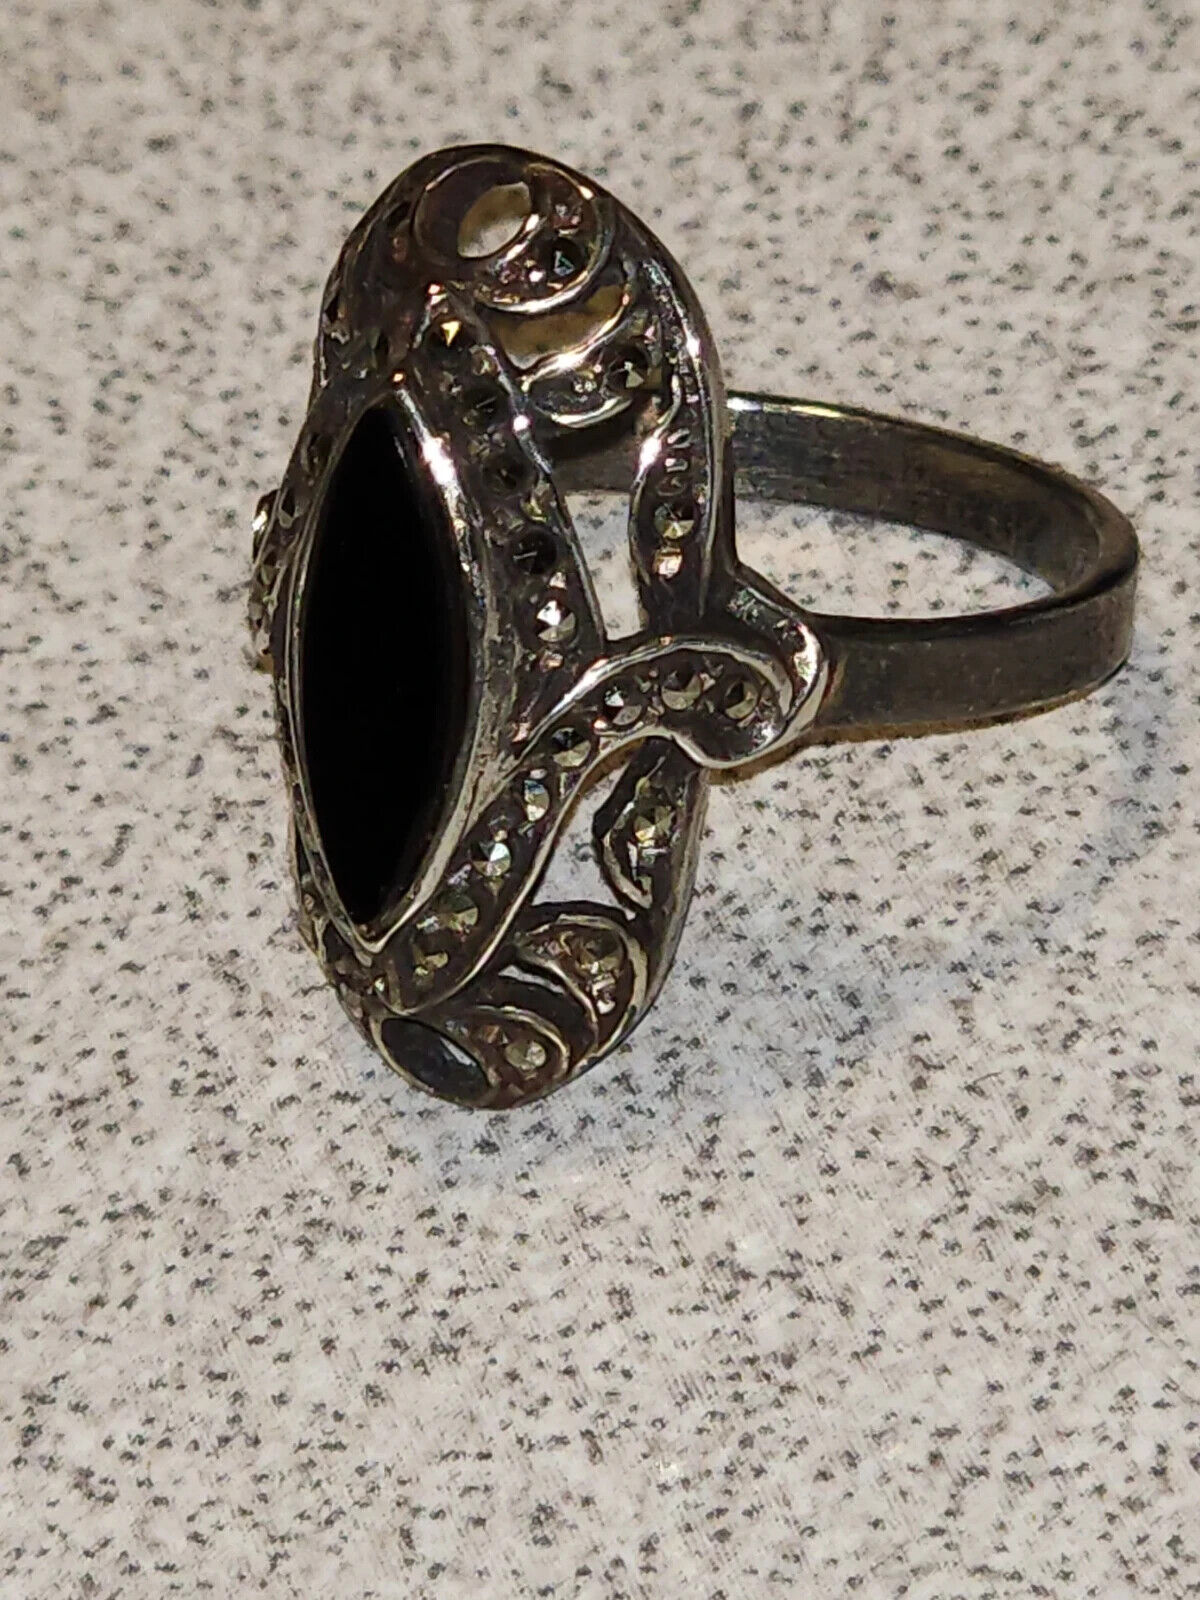 Vintage Marcasite and Black Onyx Sterling Silver Ring, Size 8.75, Imported from